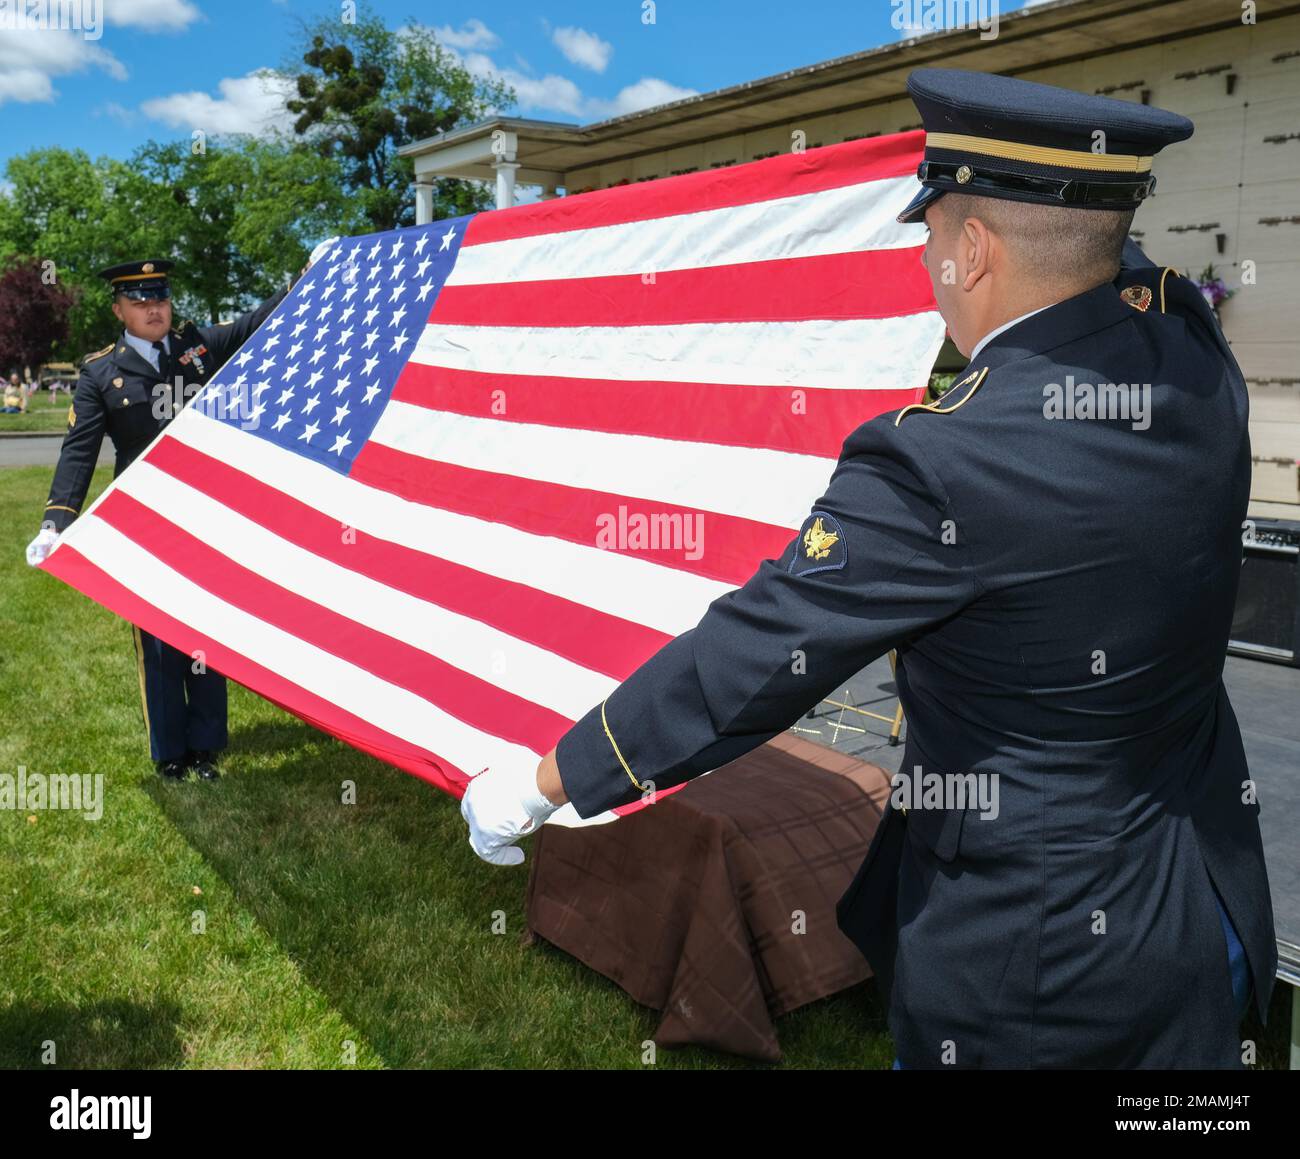 Two Oregon National Guard Funeral Honors Team members conduct a flag folding ceremony as part of a service at Hillcrest Memorial Park in Medford, Ore., on May 30, 2022. Stock Photo